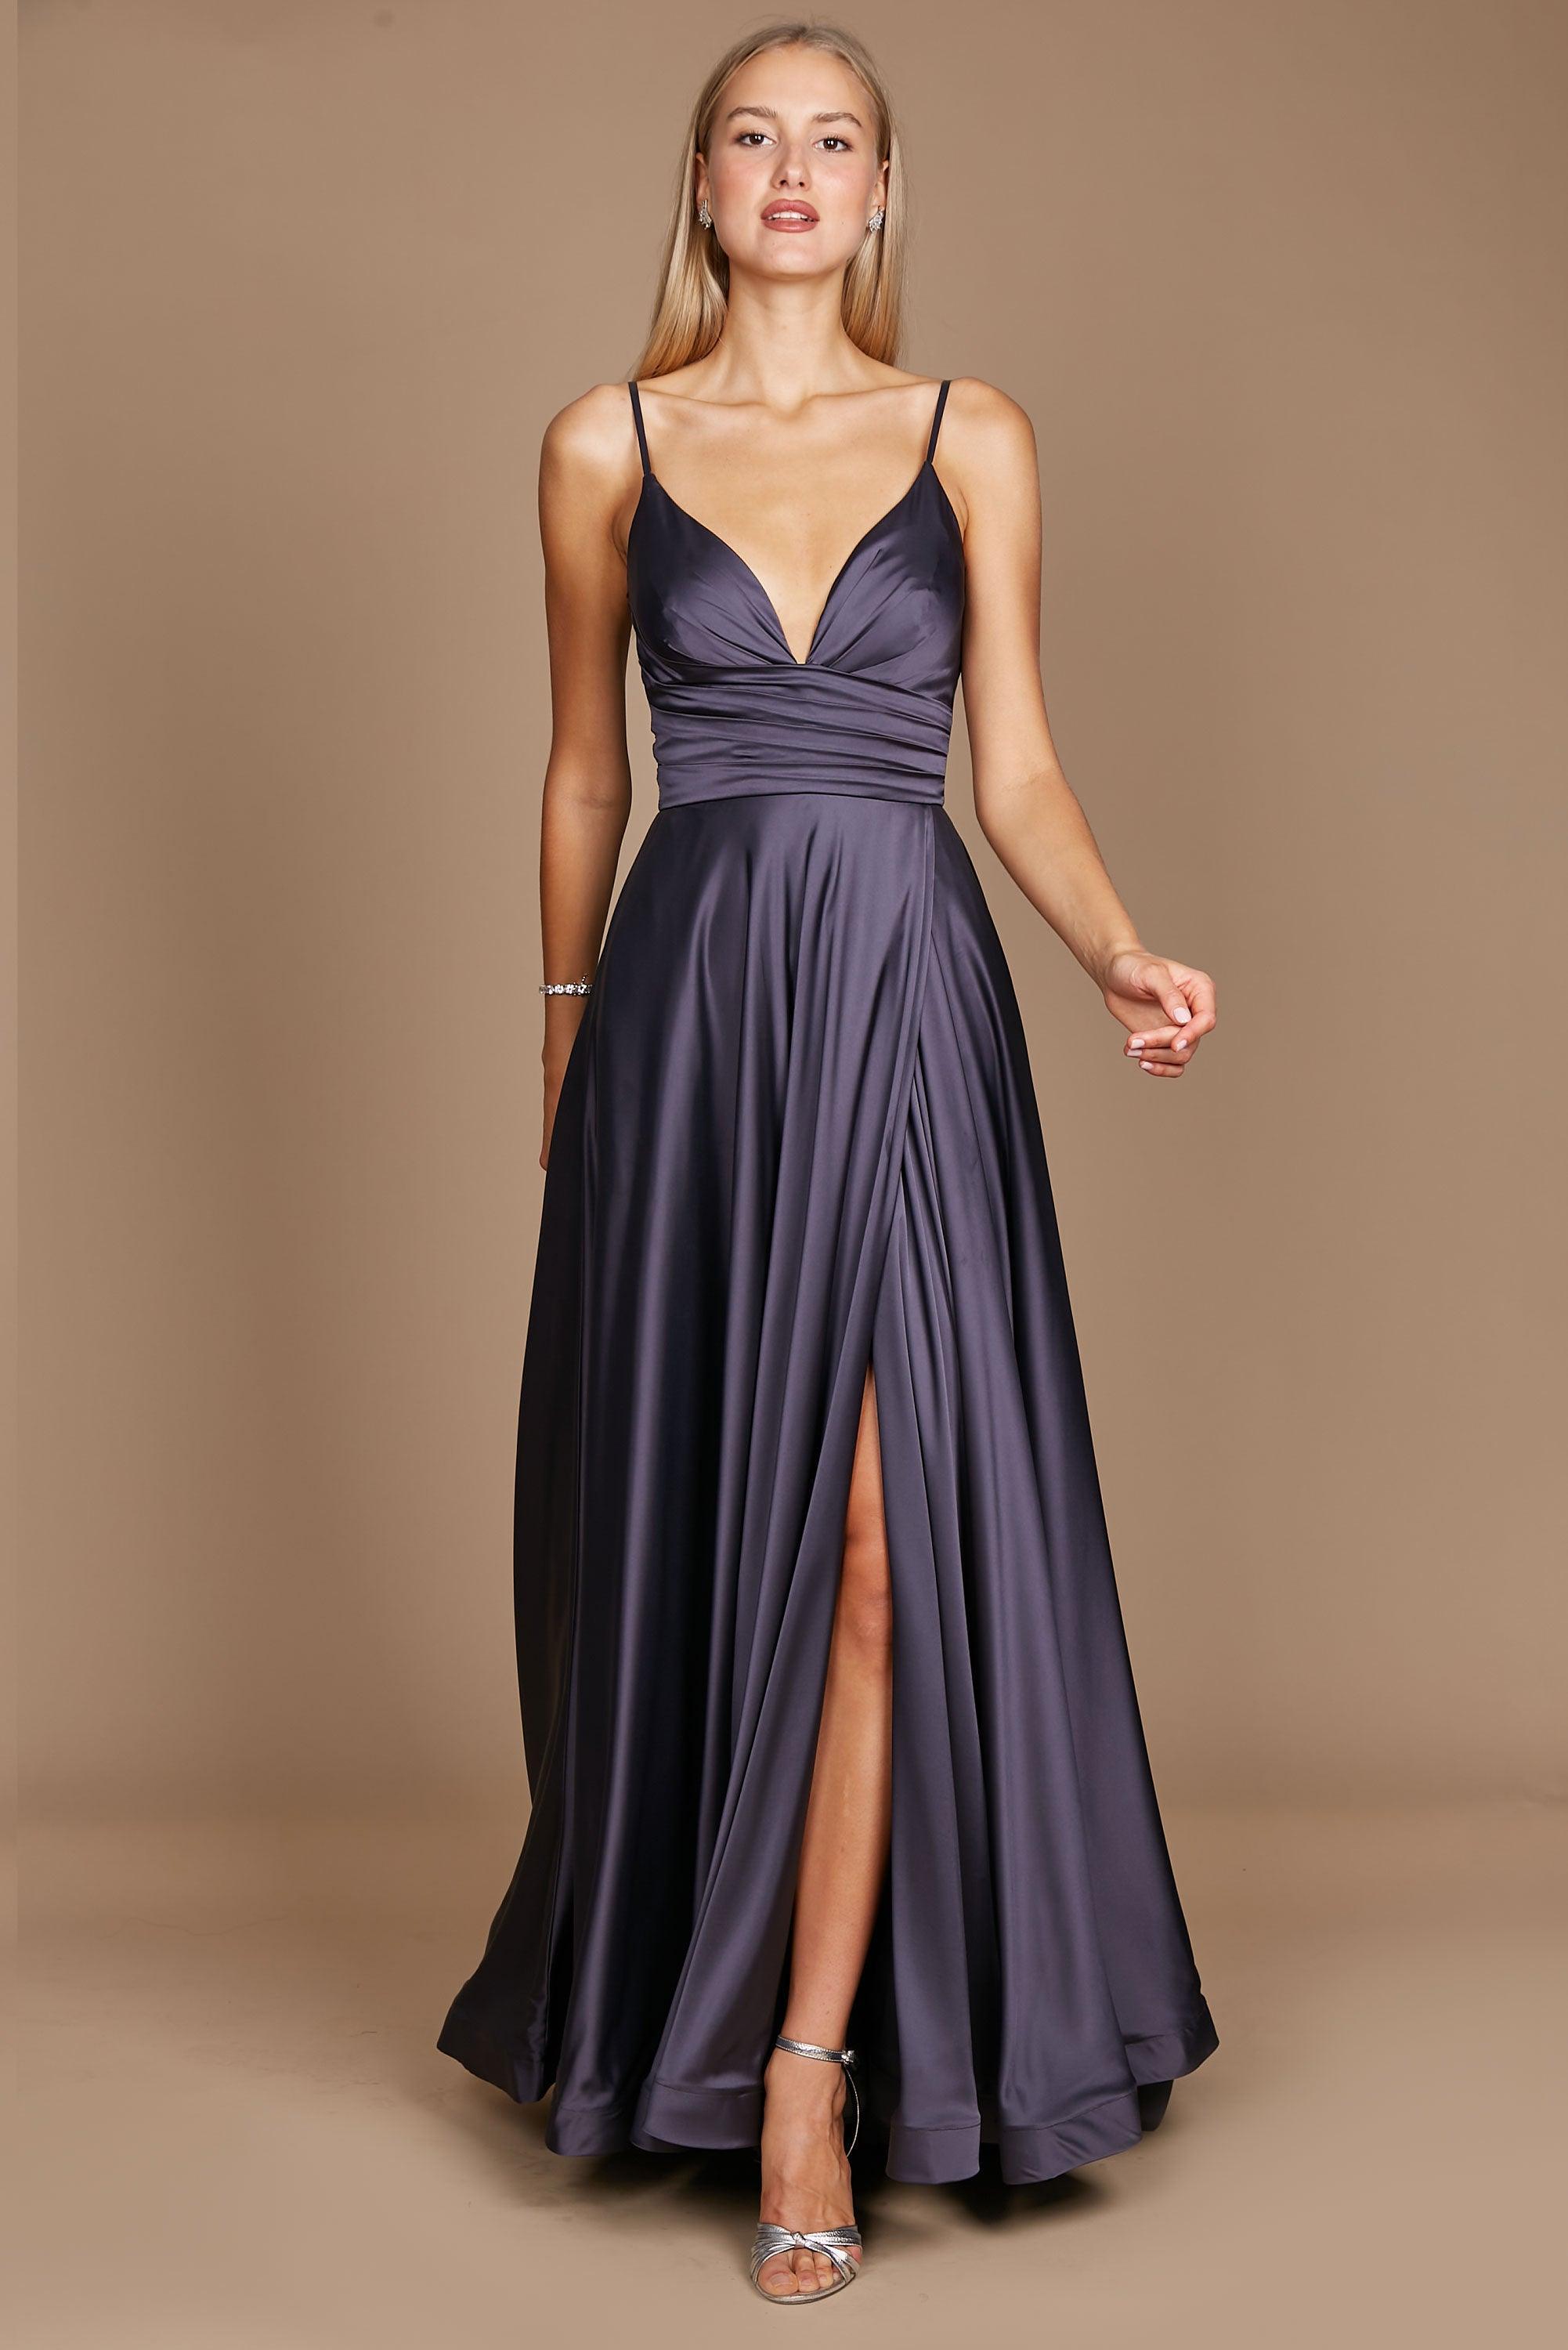 Dylan & Davids Long Spaghetti Strap Prom Formal Gown Charcoal